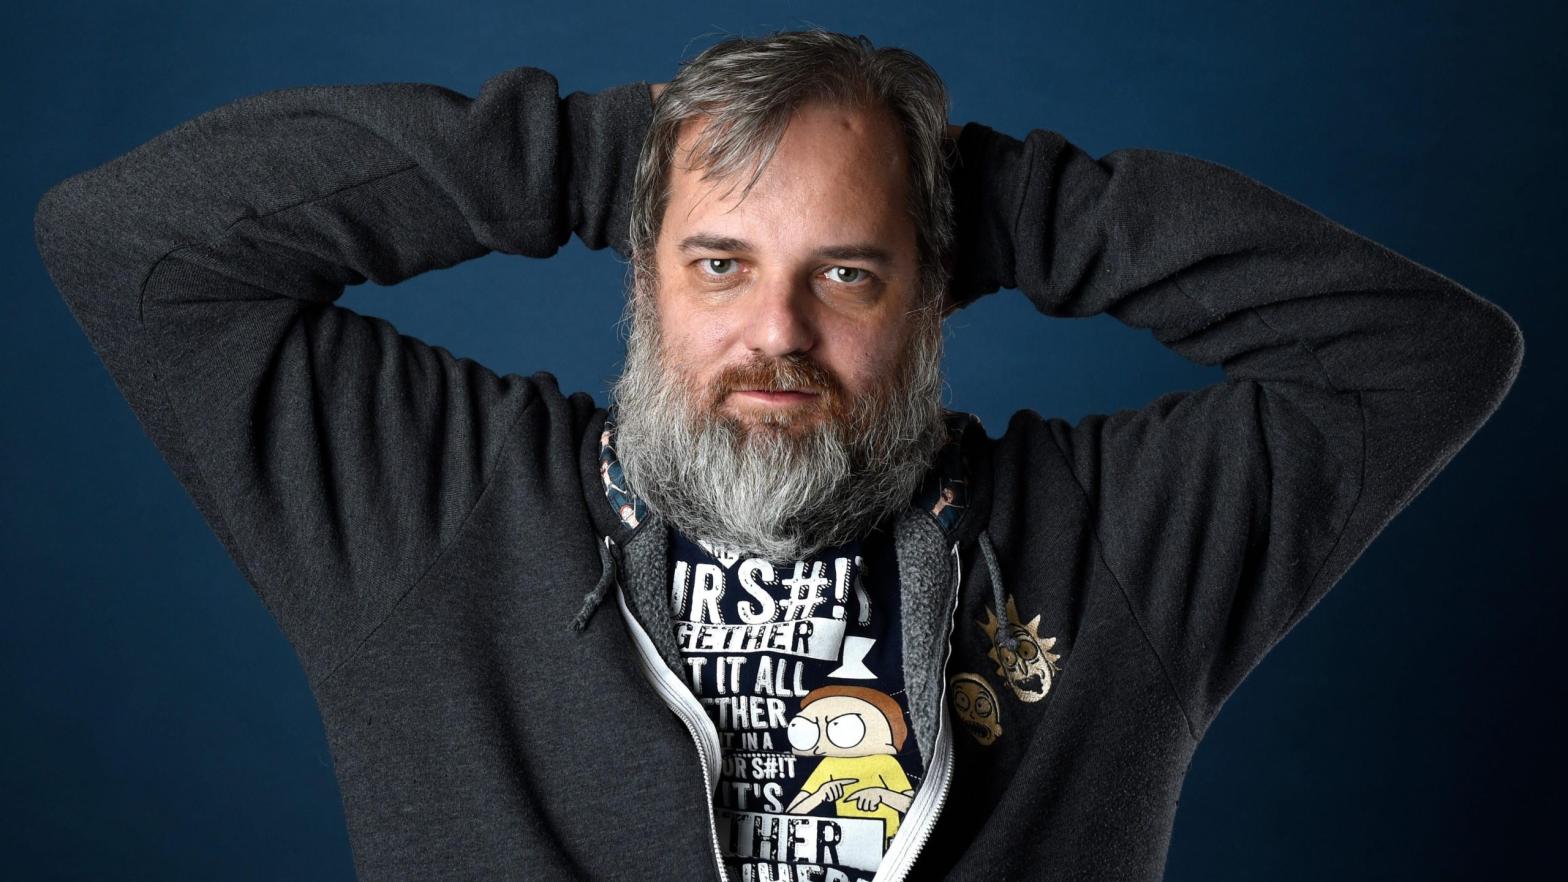 File photo of Dan Harmon, co-creator of Rick  and Morty, in San Diego, California on July 21,  2017.  (Photo: Chris Pizzello/Invision/AP, AP)